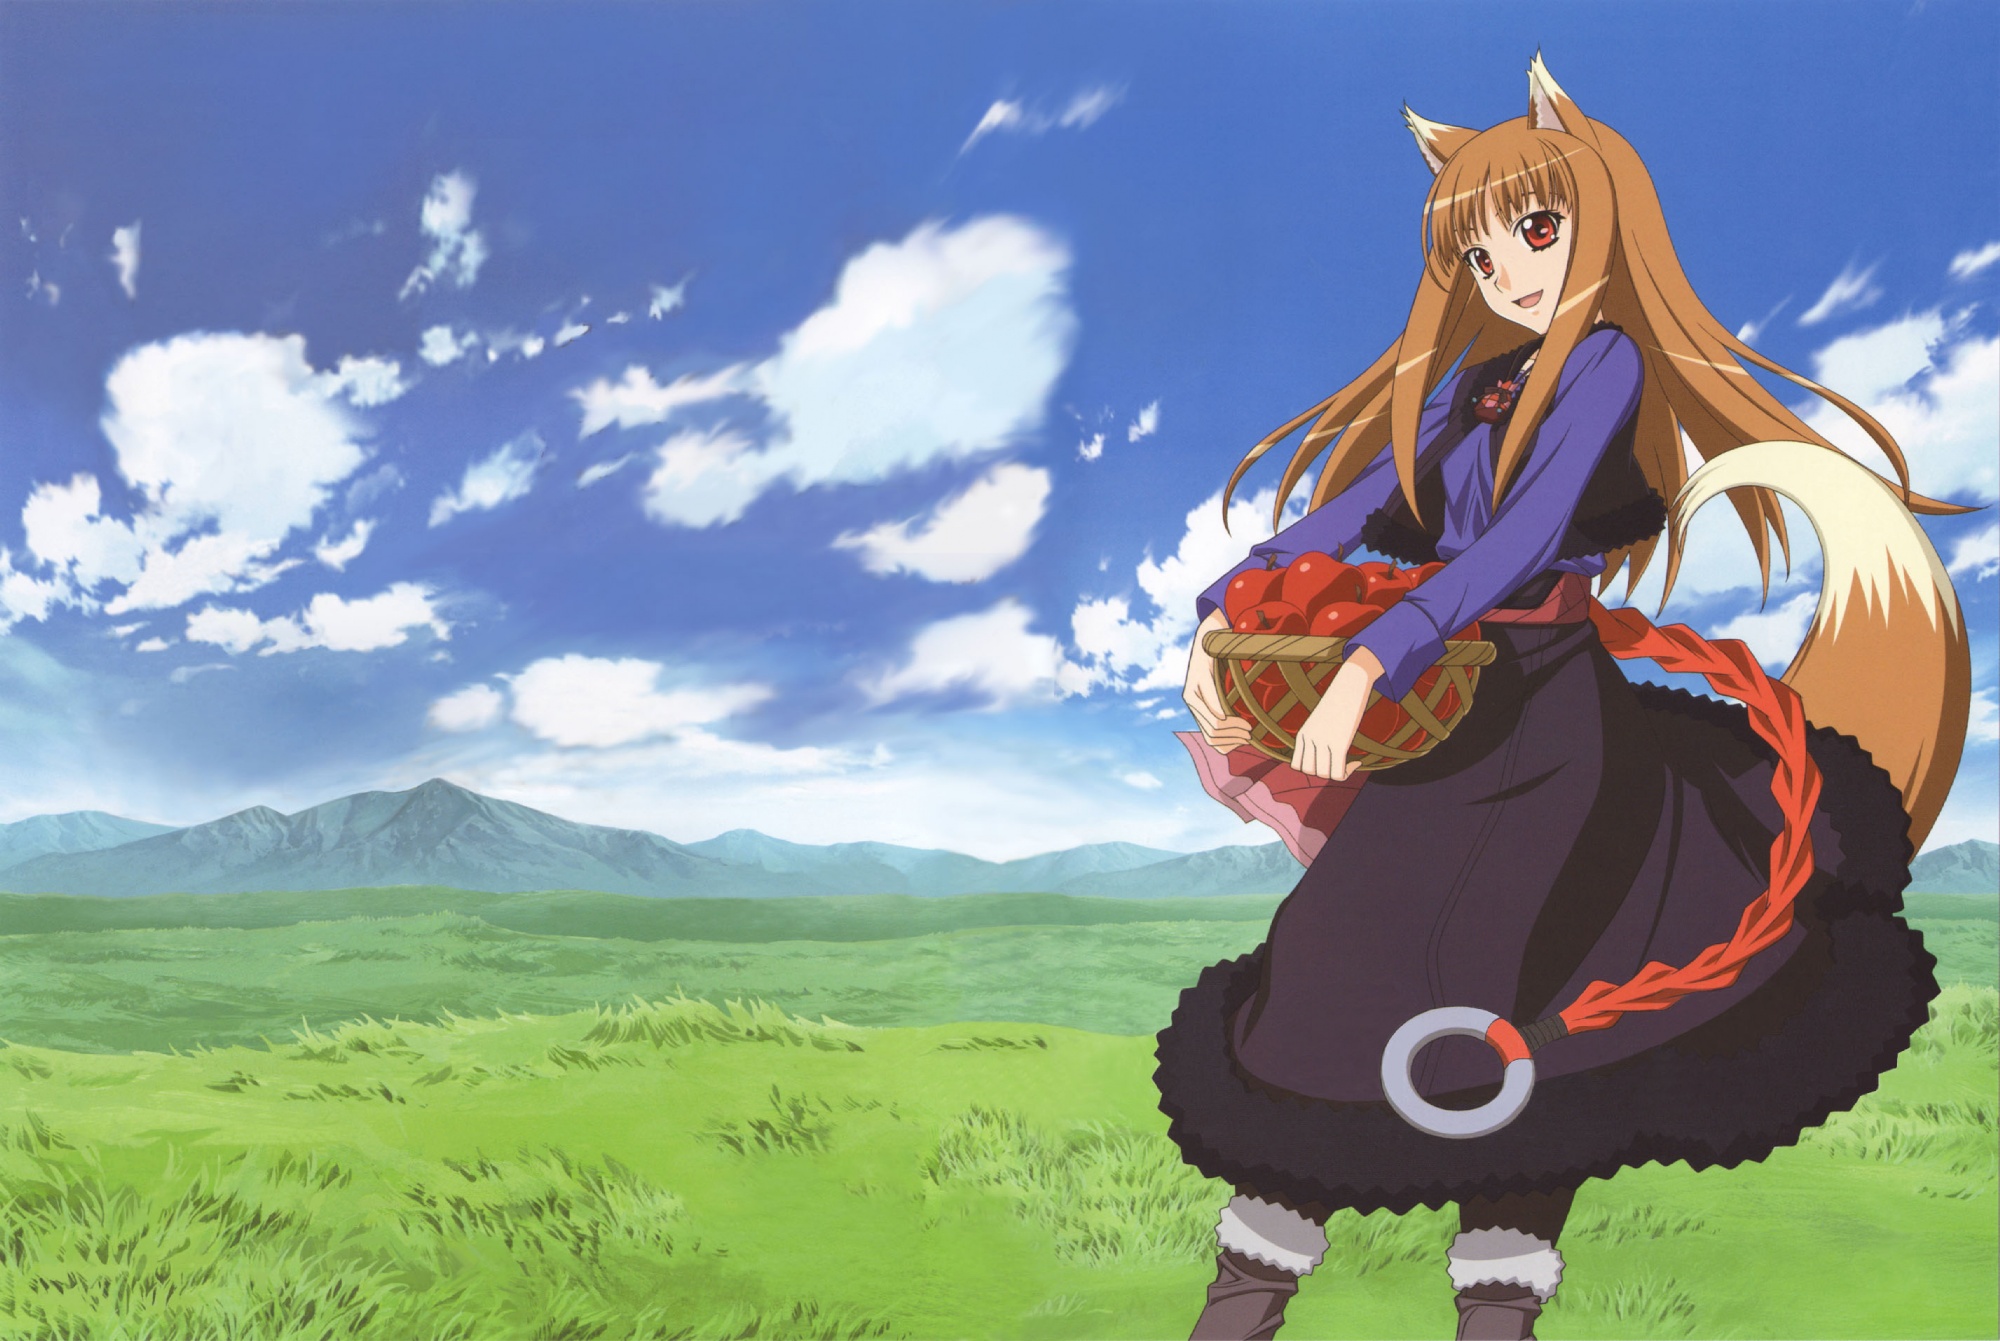 Cool HD Wallpaper food, spice and wolf, anime, skirt